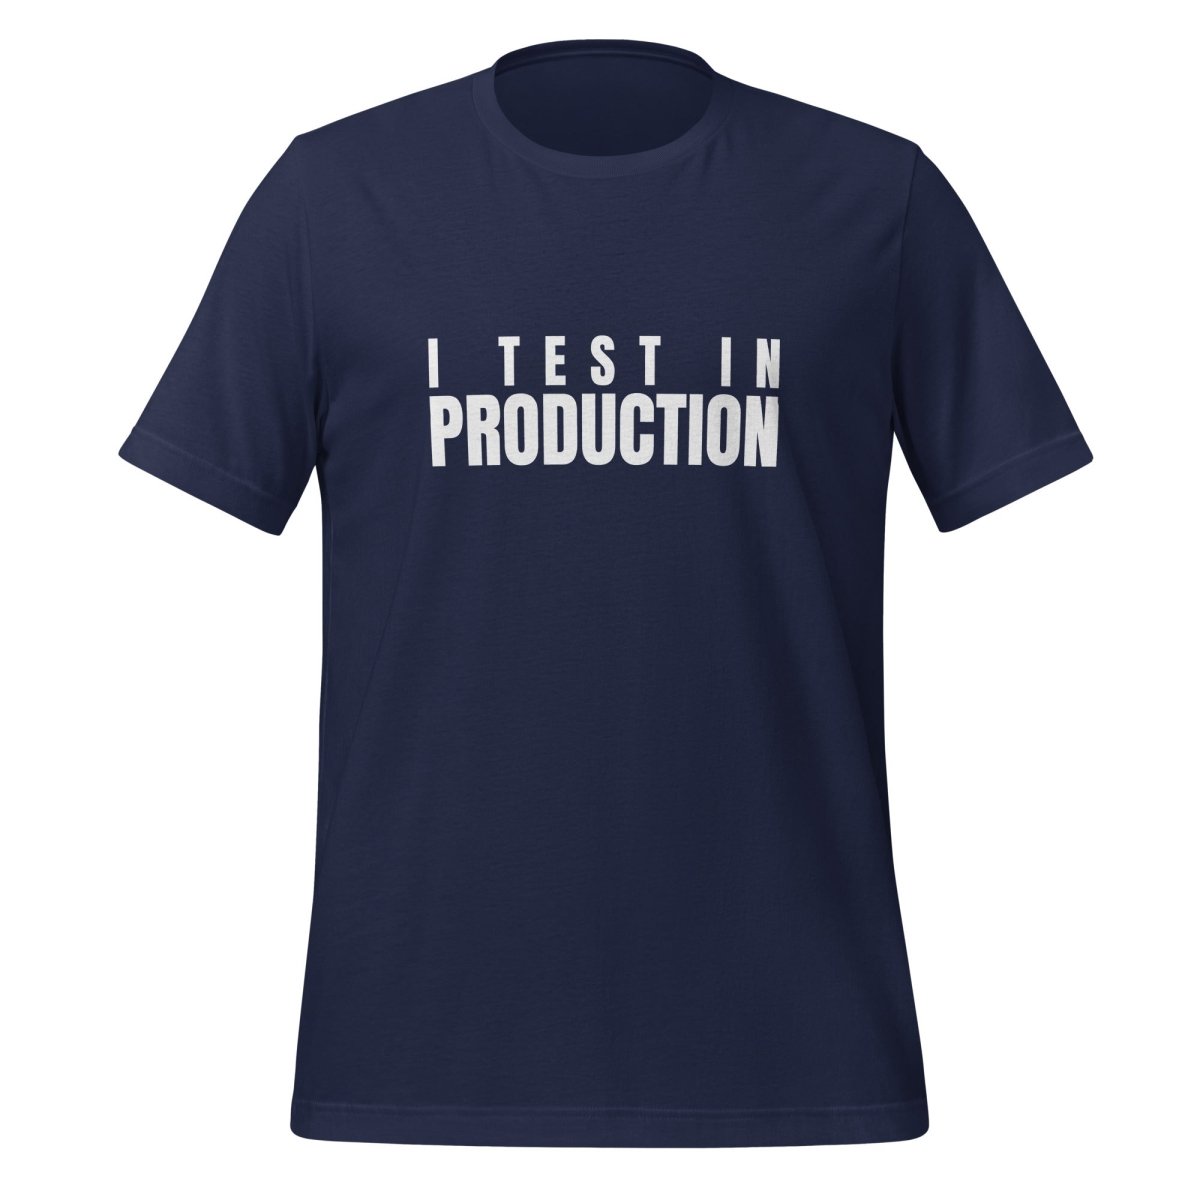 I Test in Production T - Shirt (unisex) - Navy - AI Store